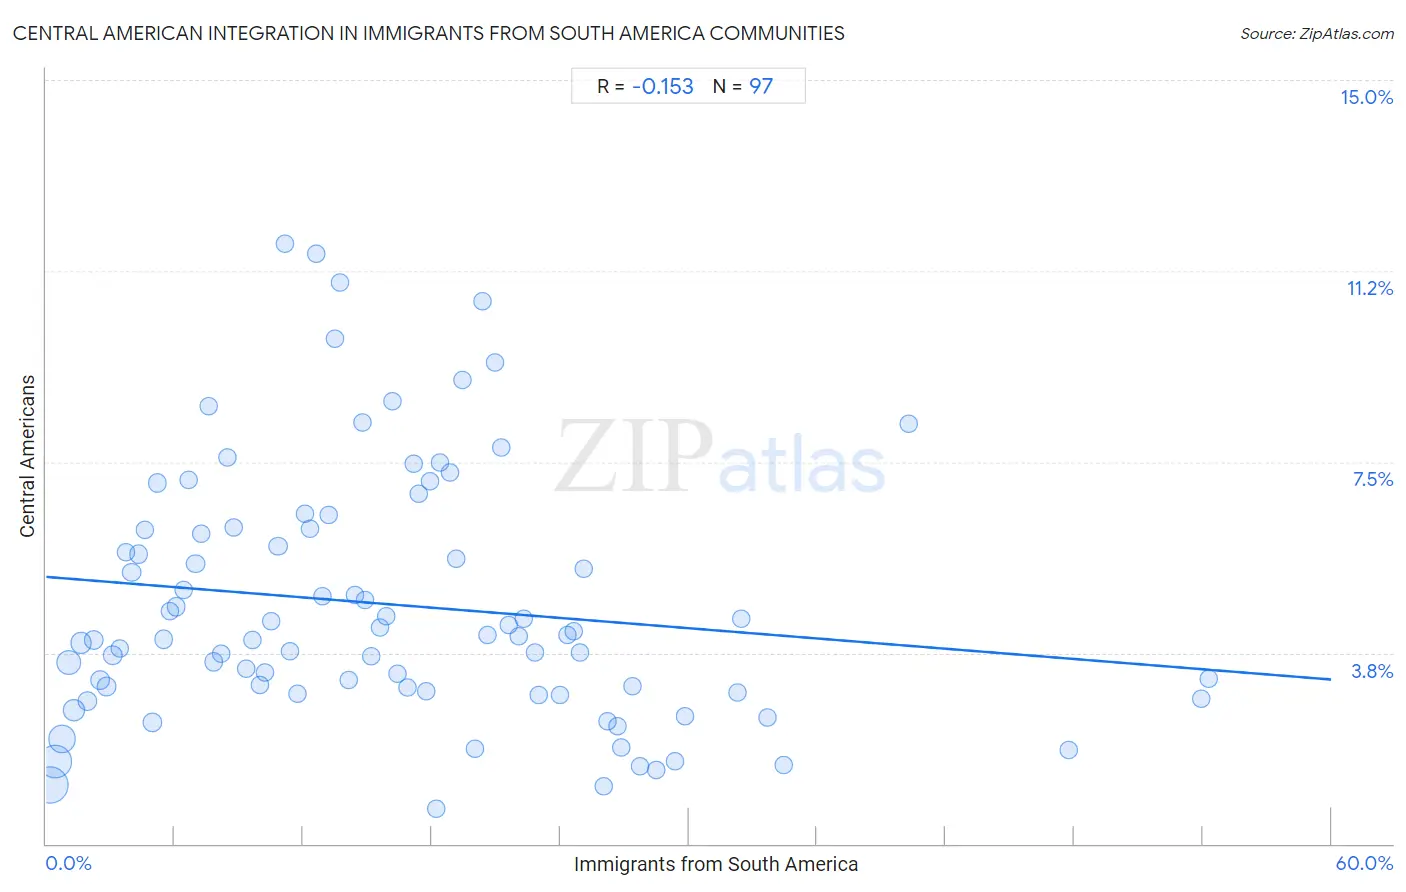 Immigrants from South America Integration in Central American Communities